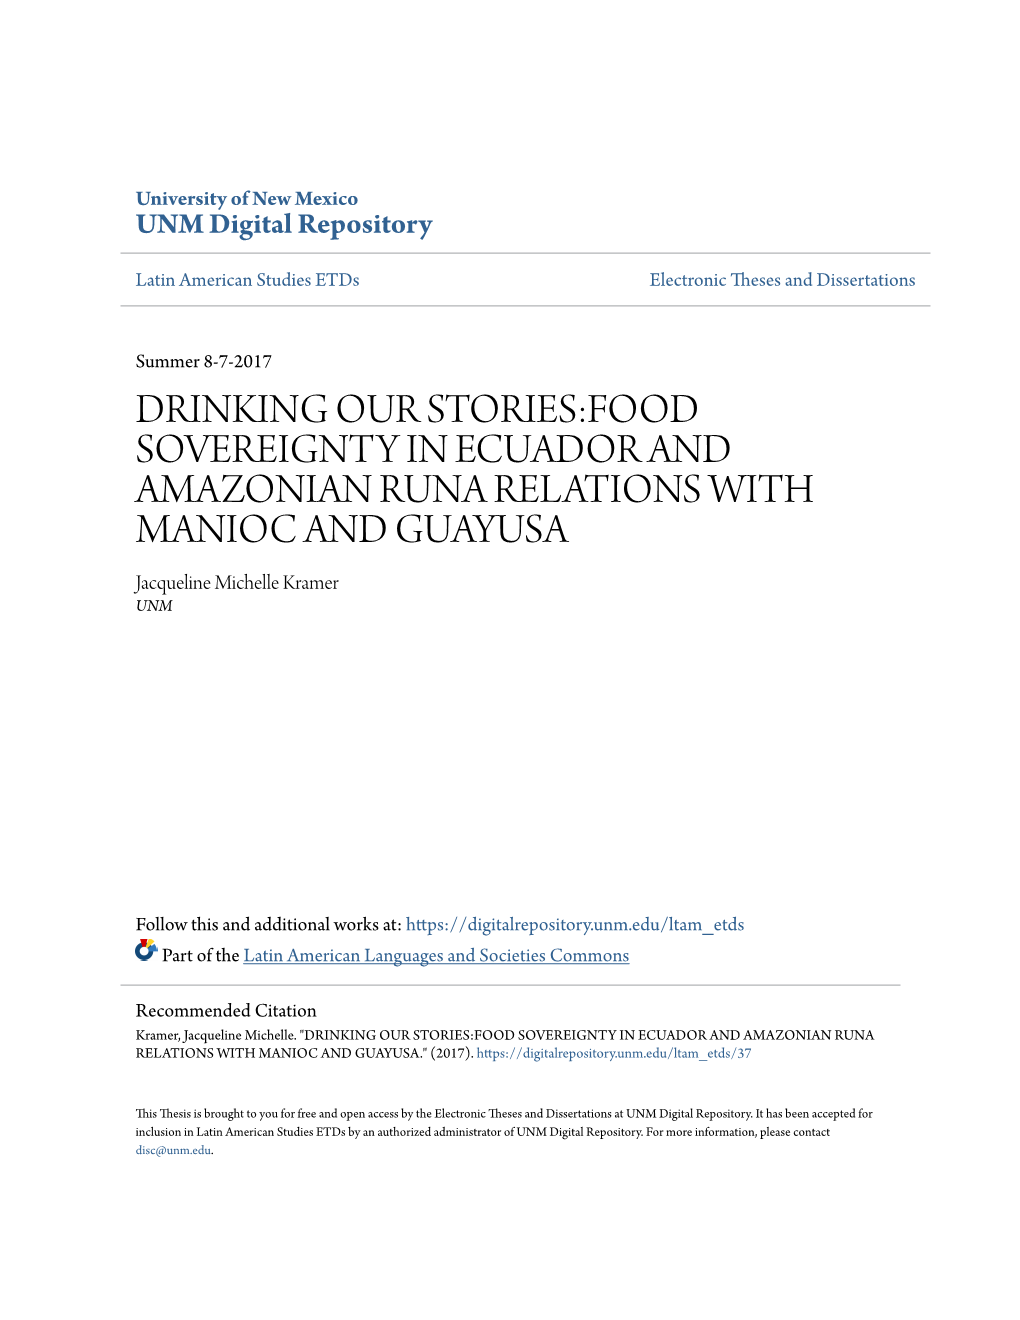 DRINKING OUR STORIES:FOOD SOVEREIGNTY in ECUADOR and AMAZONIAN RUNA RELATIONS with MANIOC and GUAYUSA Jacqueline Michelle Kramer UNM